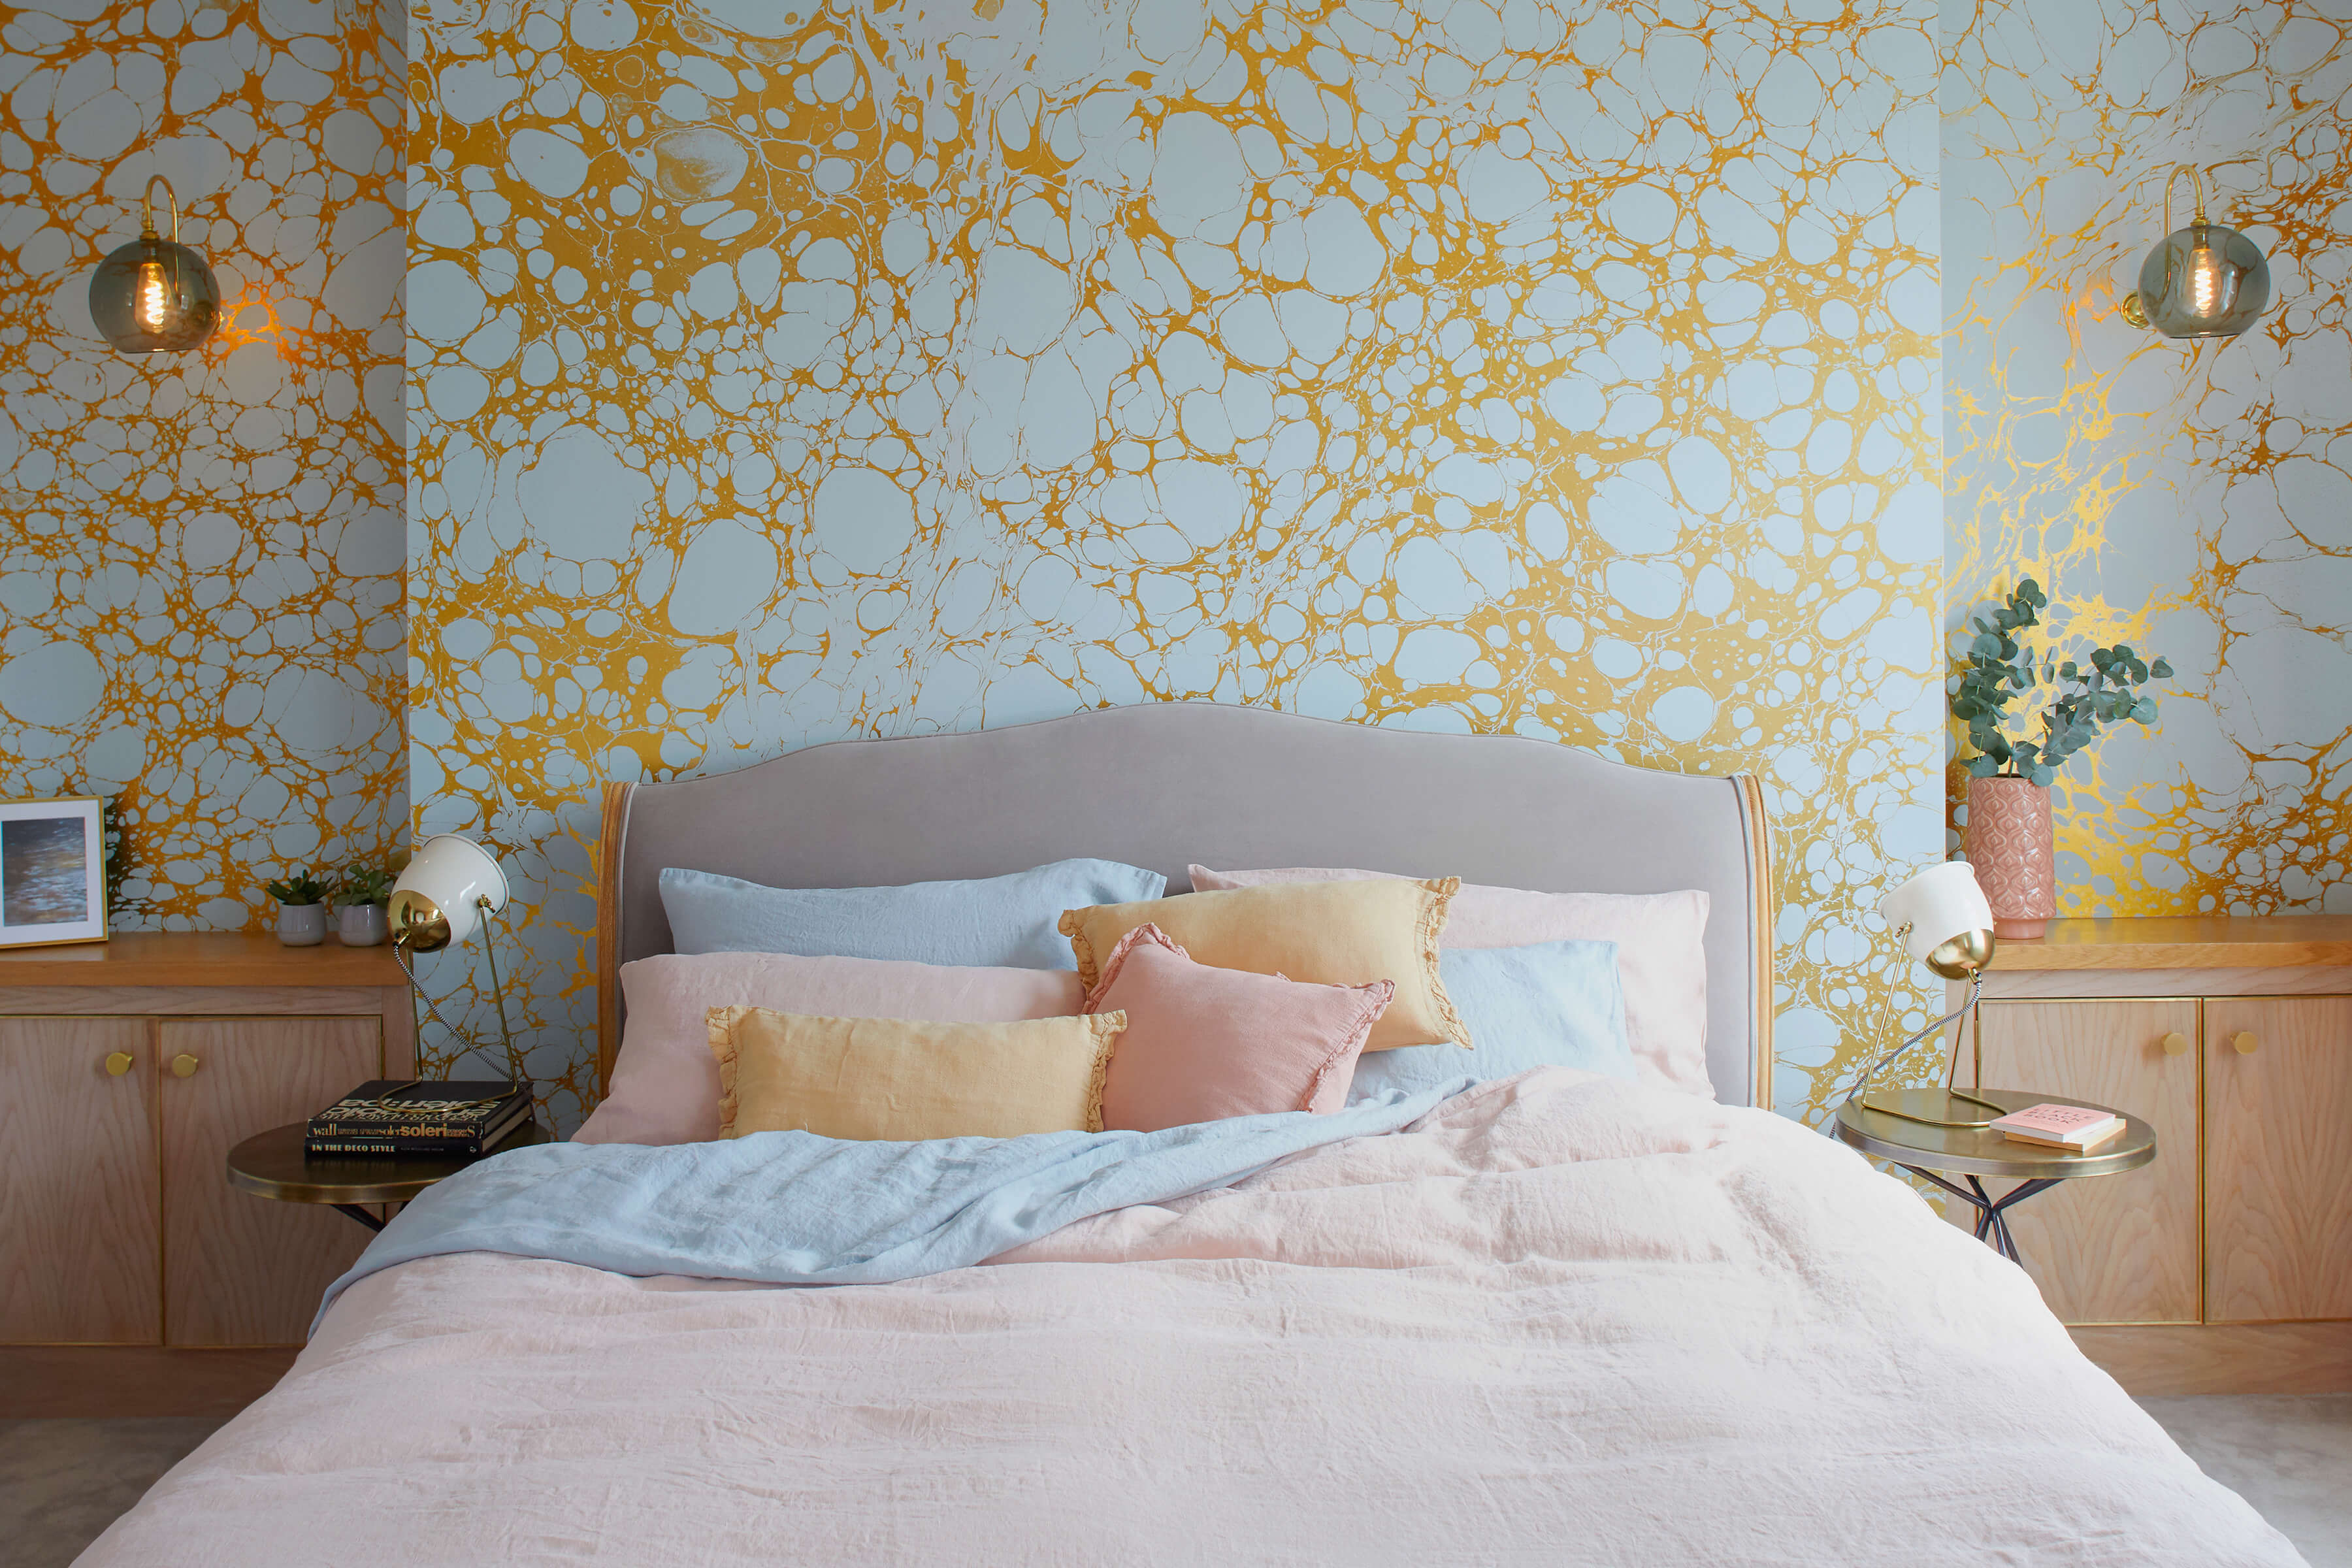 Built in bedside cabinetry bedsides a calm pink bed with gold details on wallpaper